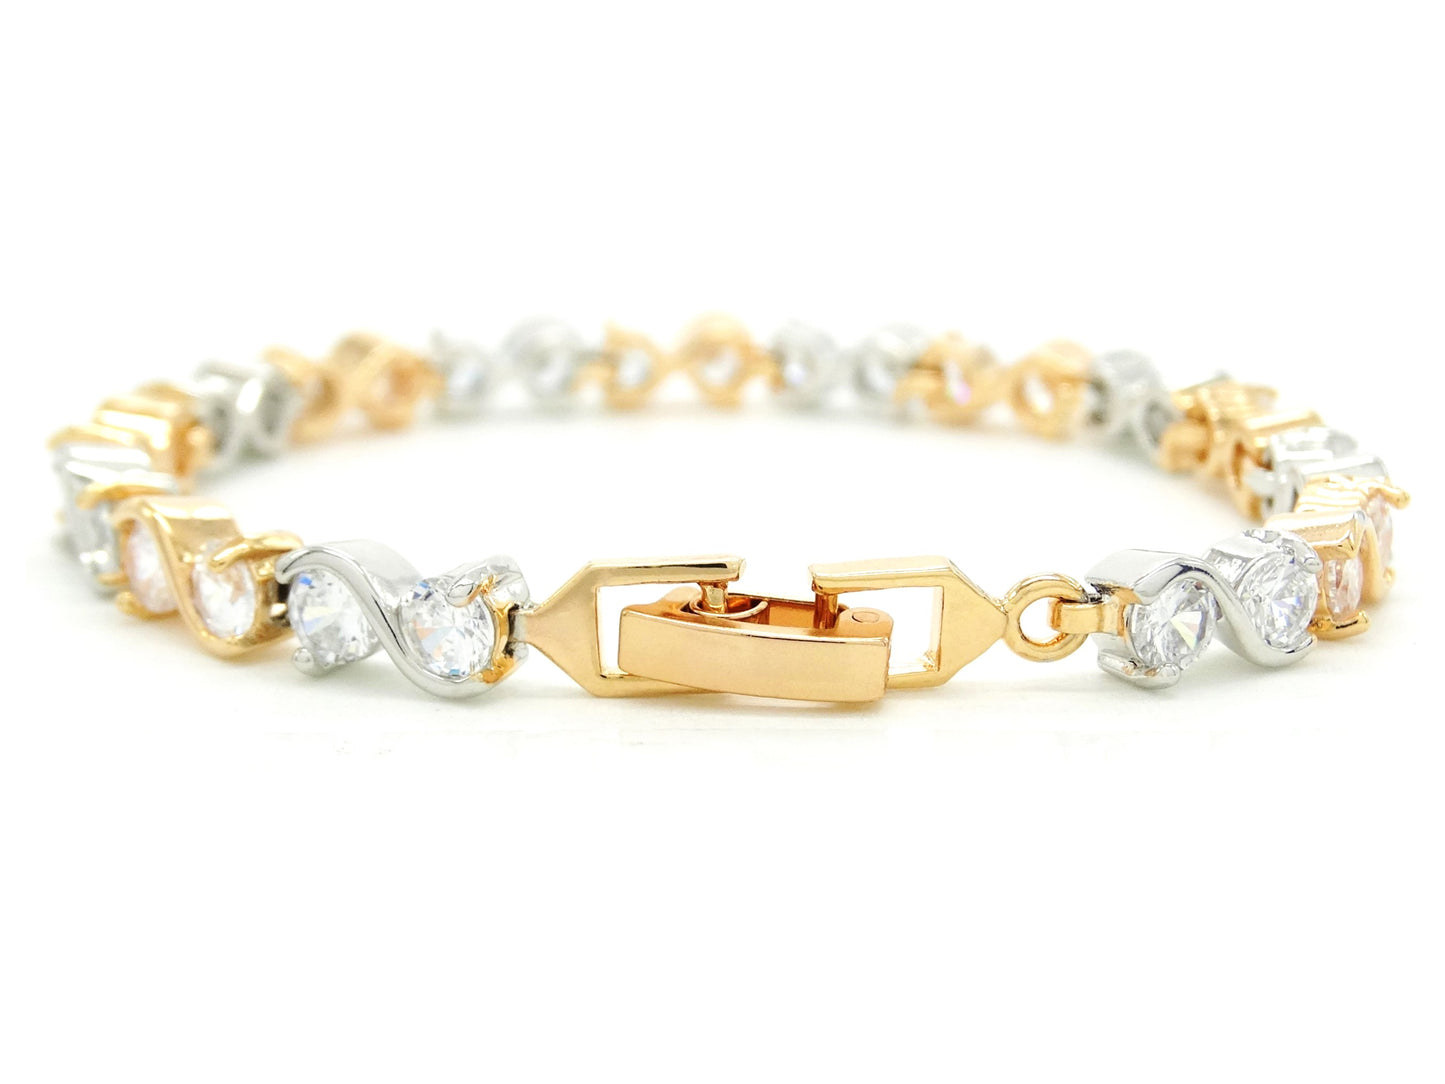 Yellow and white gold gems bracelet FASTENING